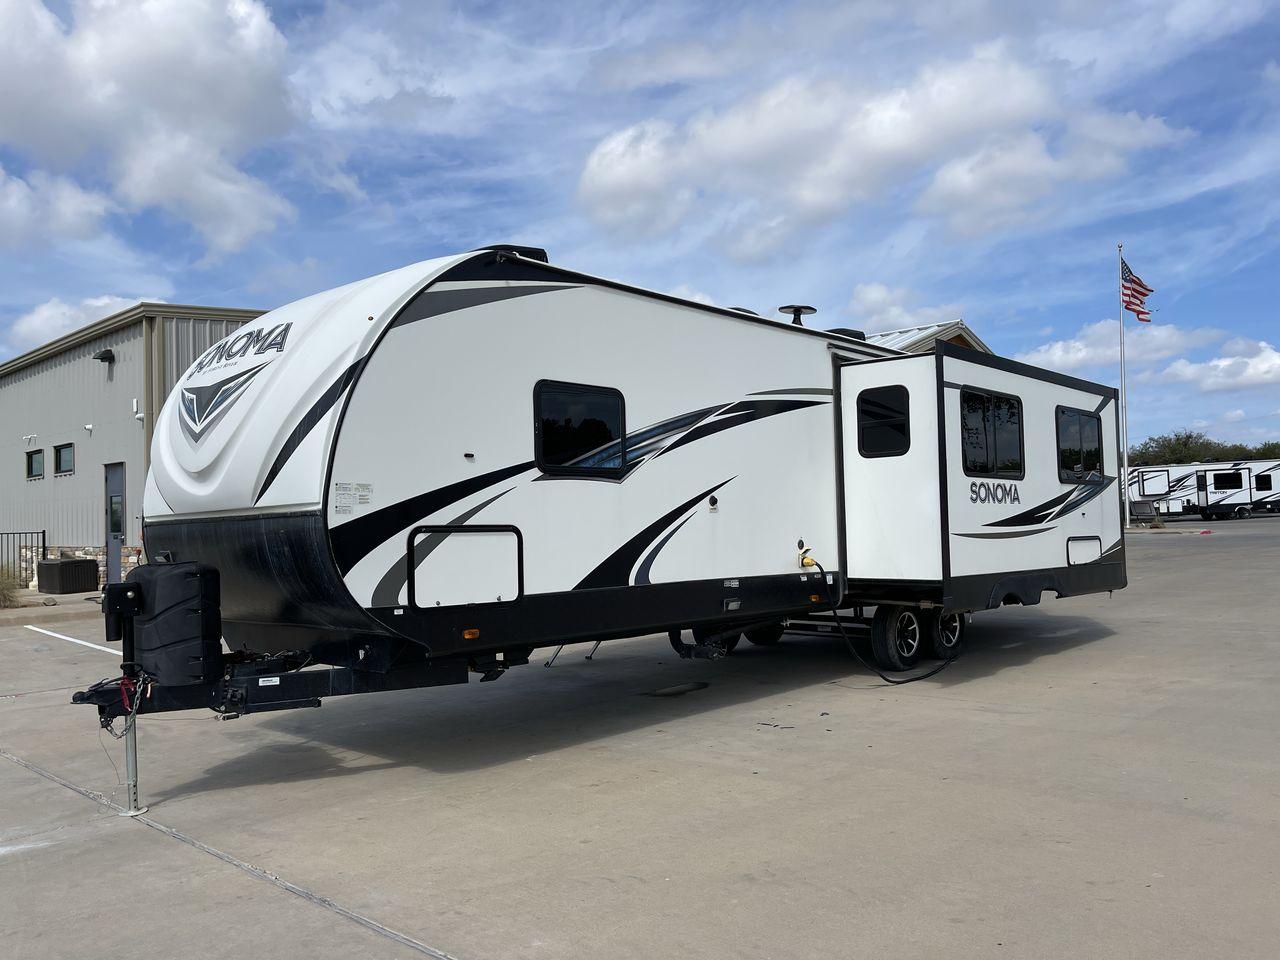 2020 FOREST RIVER SONOMA 2903RK (4X4TSKE28LE) , Length: 34.75 ft. | Dry Weight: 7,799 lbs. | Gross Weight: 9,999 lbs. | Slides: 1 transmission, located at 4319 N Main St, Cleburne, TX, 76033, (817) 678-5133, 32.385960, -97.391212 - Experience extraordinary adventures with the 2020 Forest River Sonoma 2903RK. Measuring 34.75 feet long and weighing 7,799 pounds dry, this unit is both large and lightweight, making it easy to pull and handle. The Sonoma 2903RK provides adequate living space without sacrificing practicality with a - Photo #23